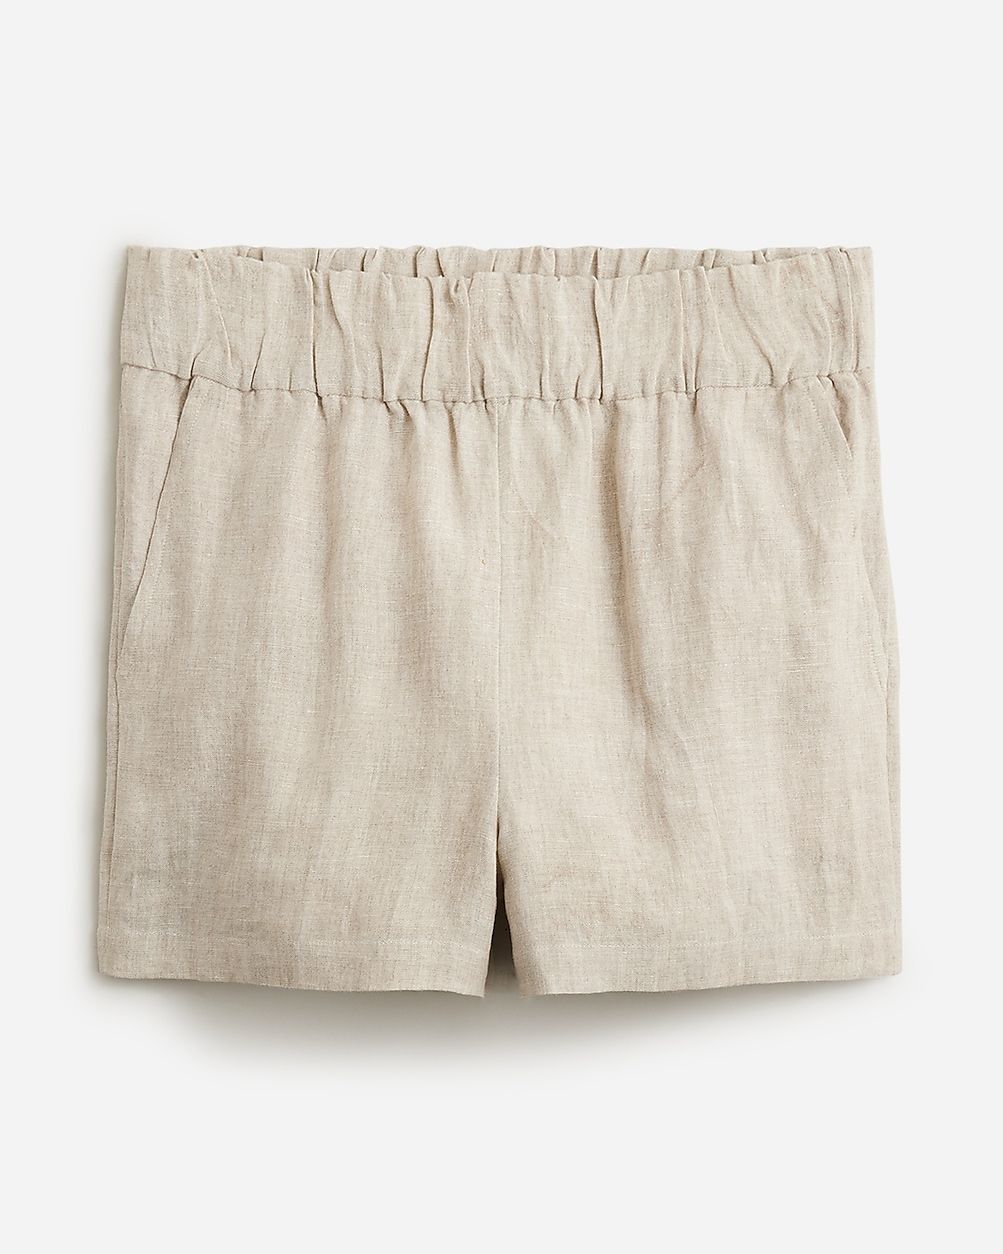 new color4.7(64 REVIEWS)Tropez short in linen$69.50Flax$79.50$69.50$69.50$49.50Select a sizeSize ... | J.Crew US